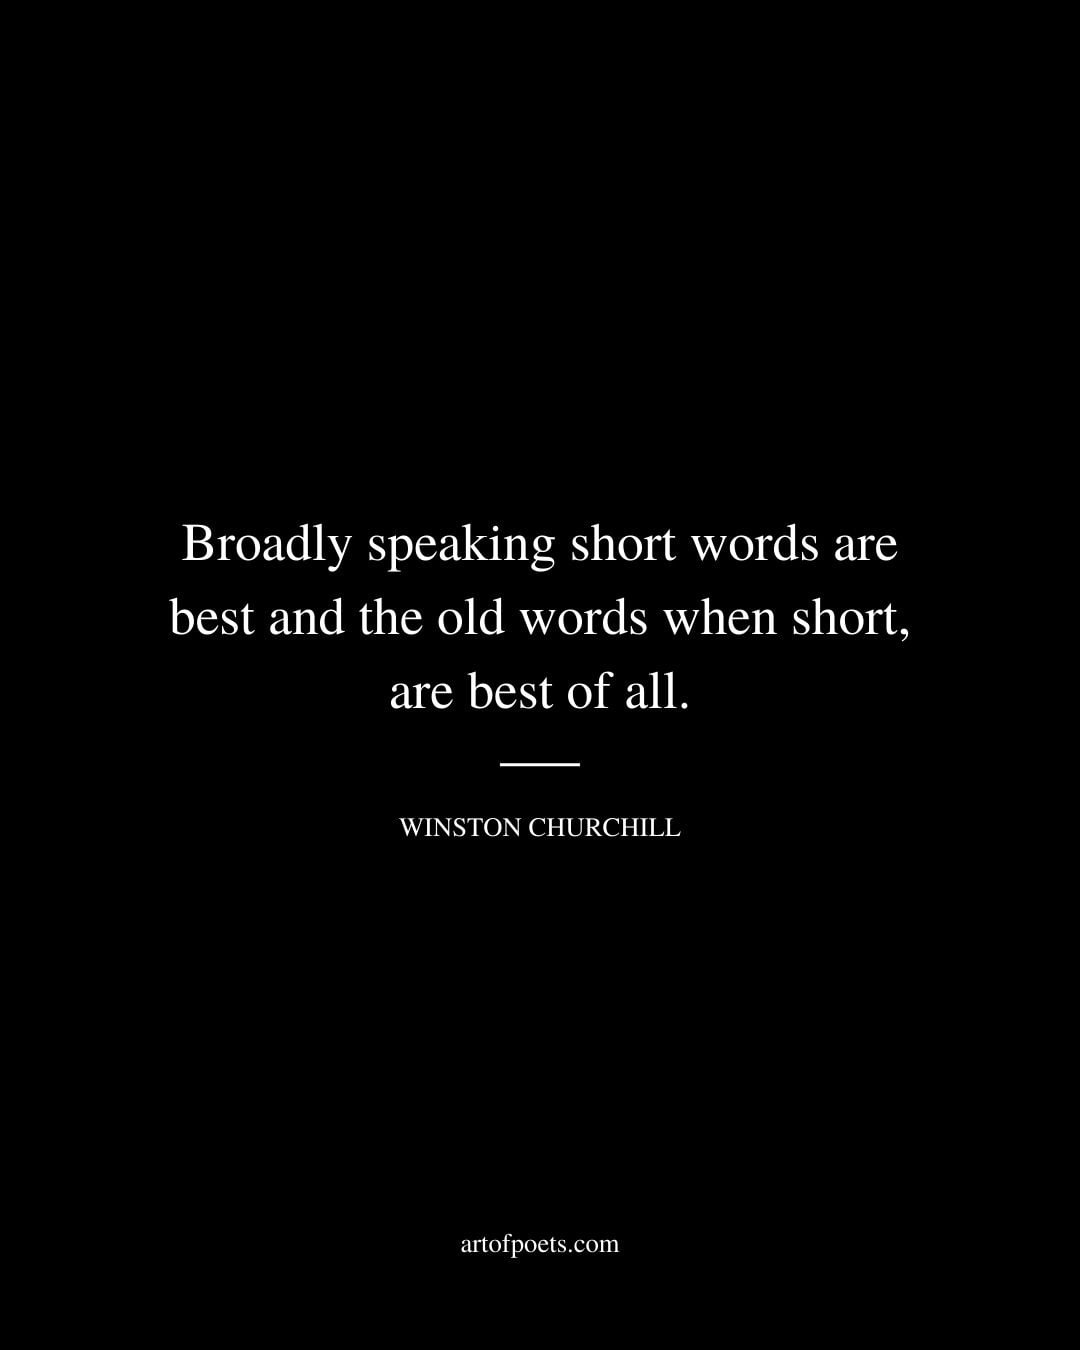 Broadly speaking short words are best and the old words when short are best of all